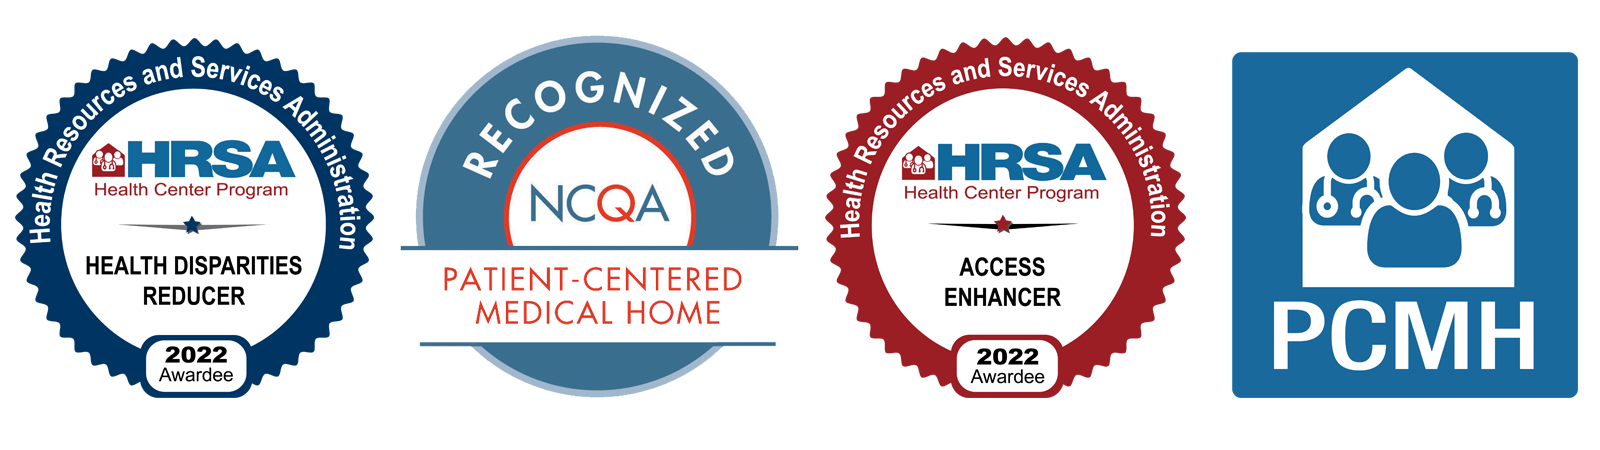 Laurel Health was nationally recognized for improving access and quality care by HRSA and the National Committee for Quality Assurance; pictured are award badges for the Access Enhancer, Patient-Centered Medical Home (PCMH), and Healthcare Disparities Reducer